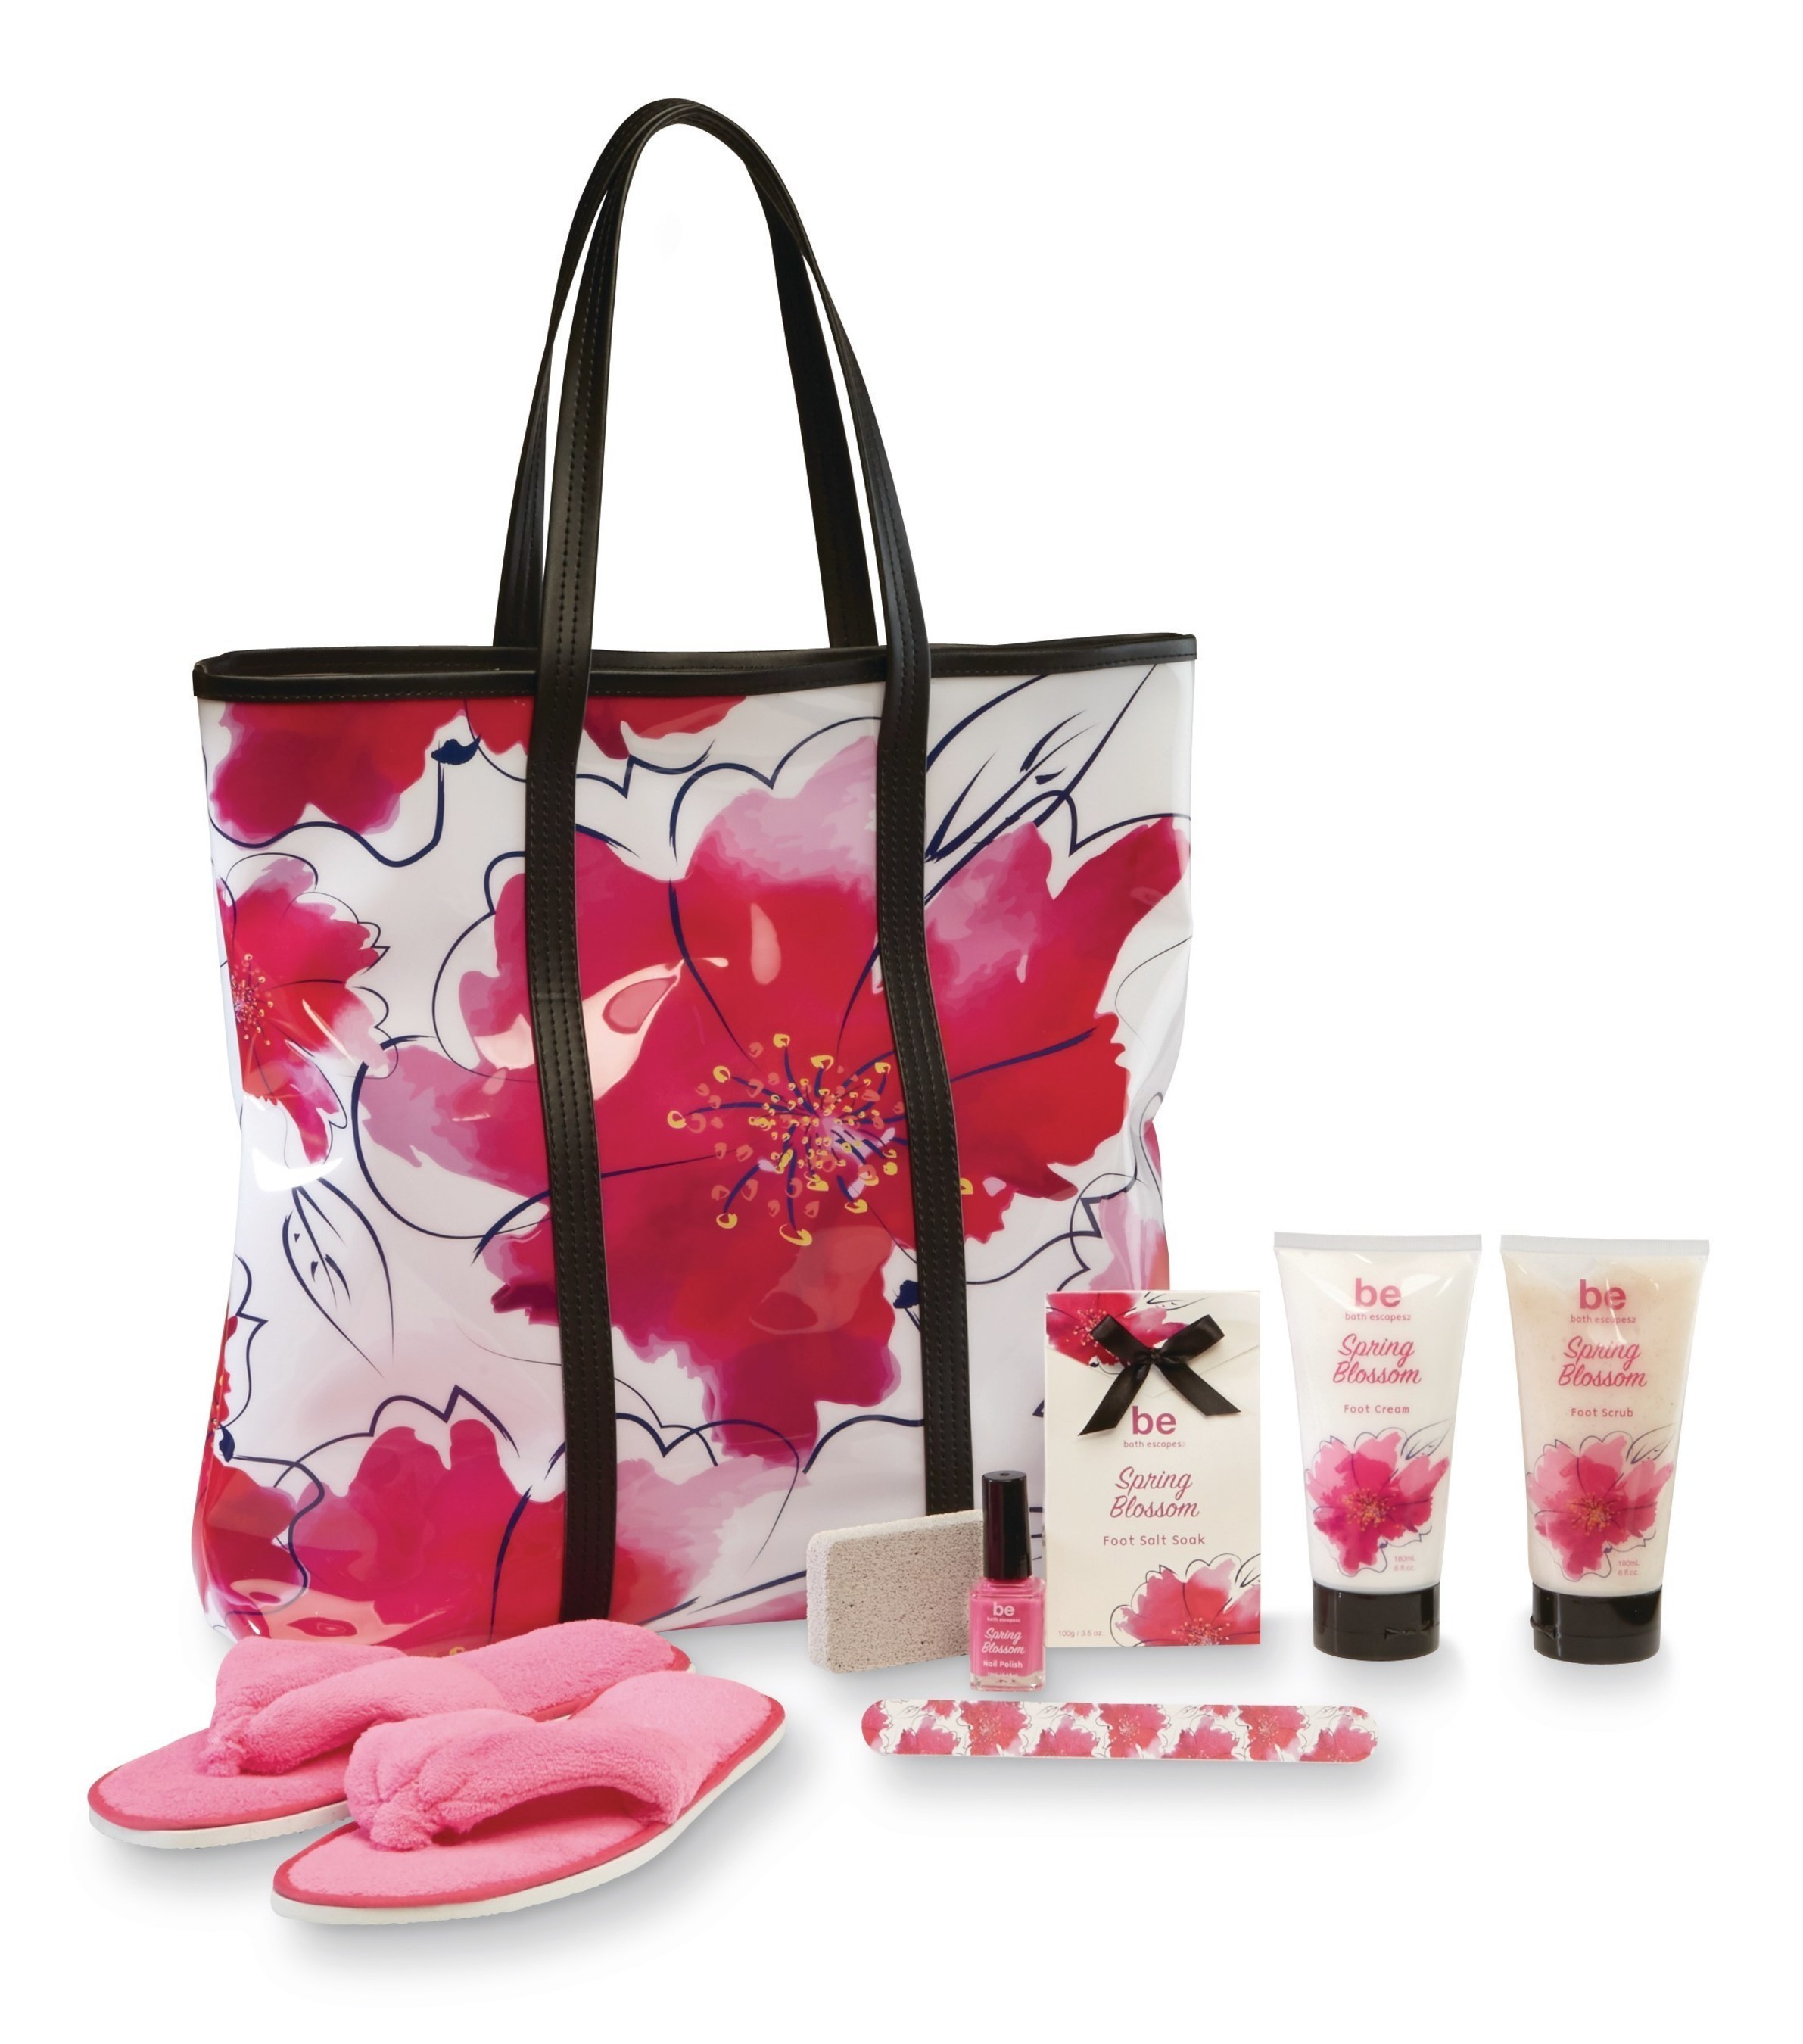 Kmart's Exclusive Mother's Day Spa-Inspired Beauty Bag